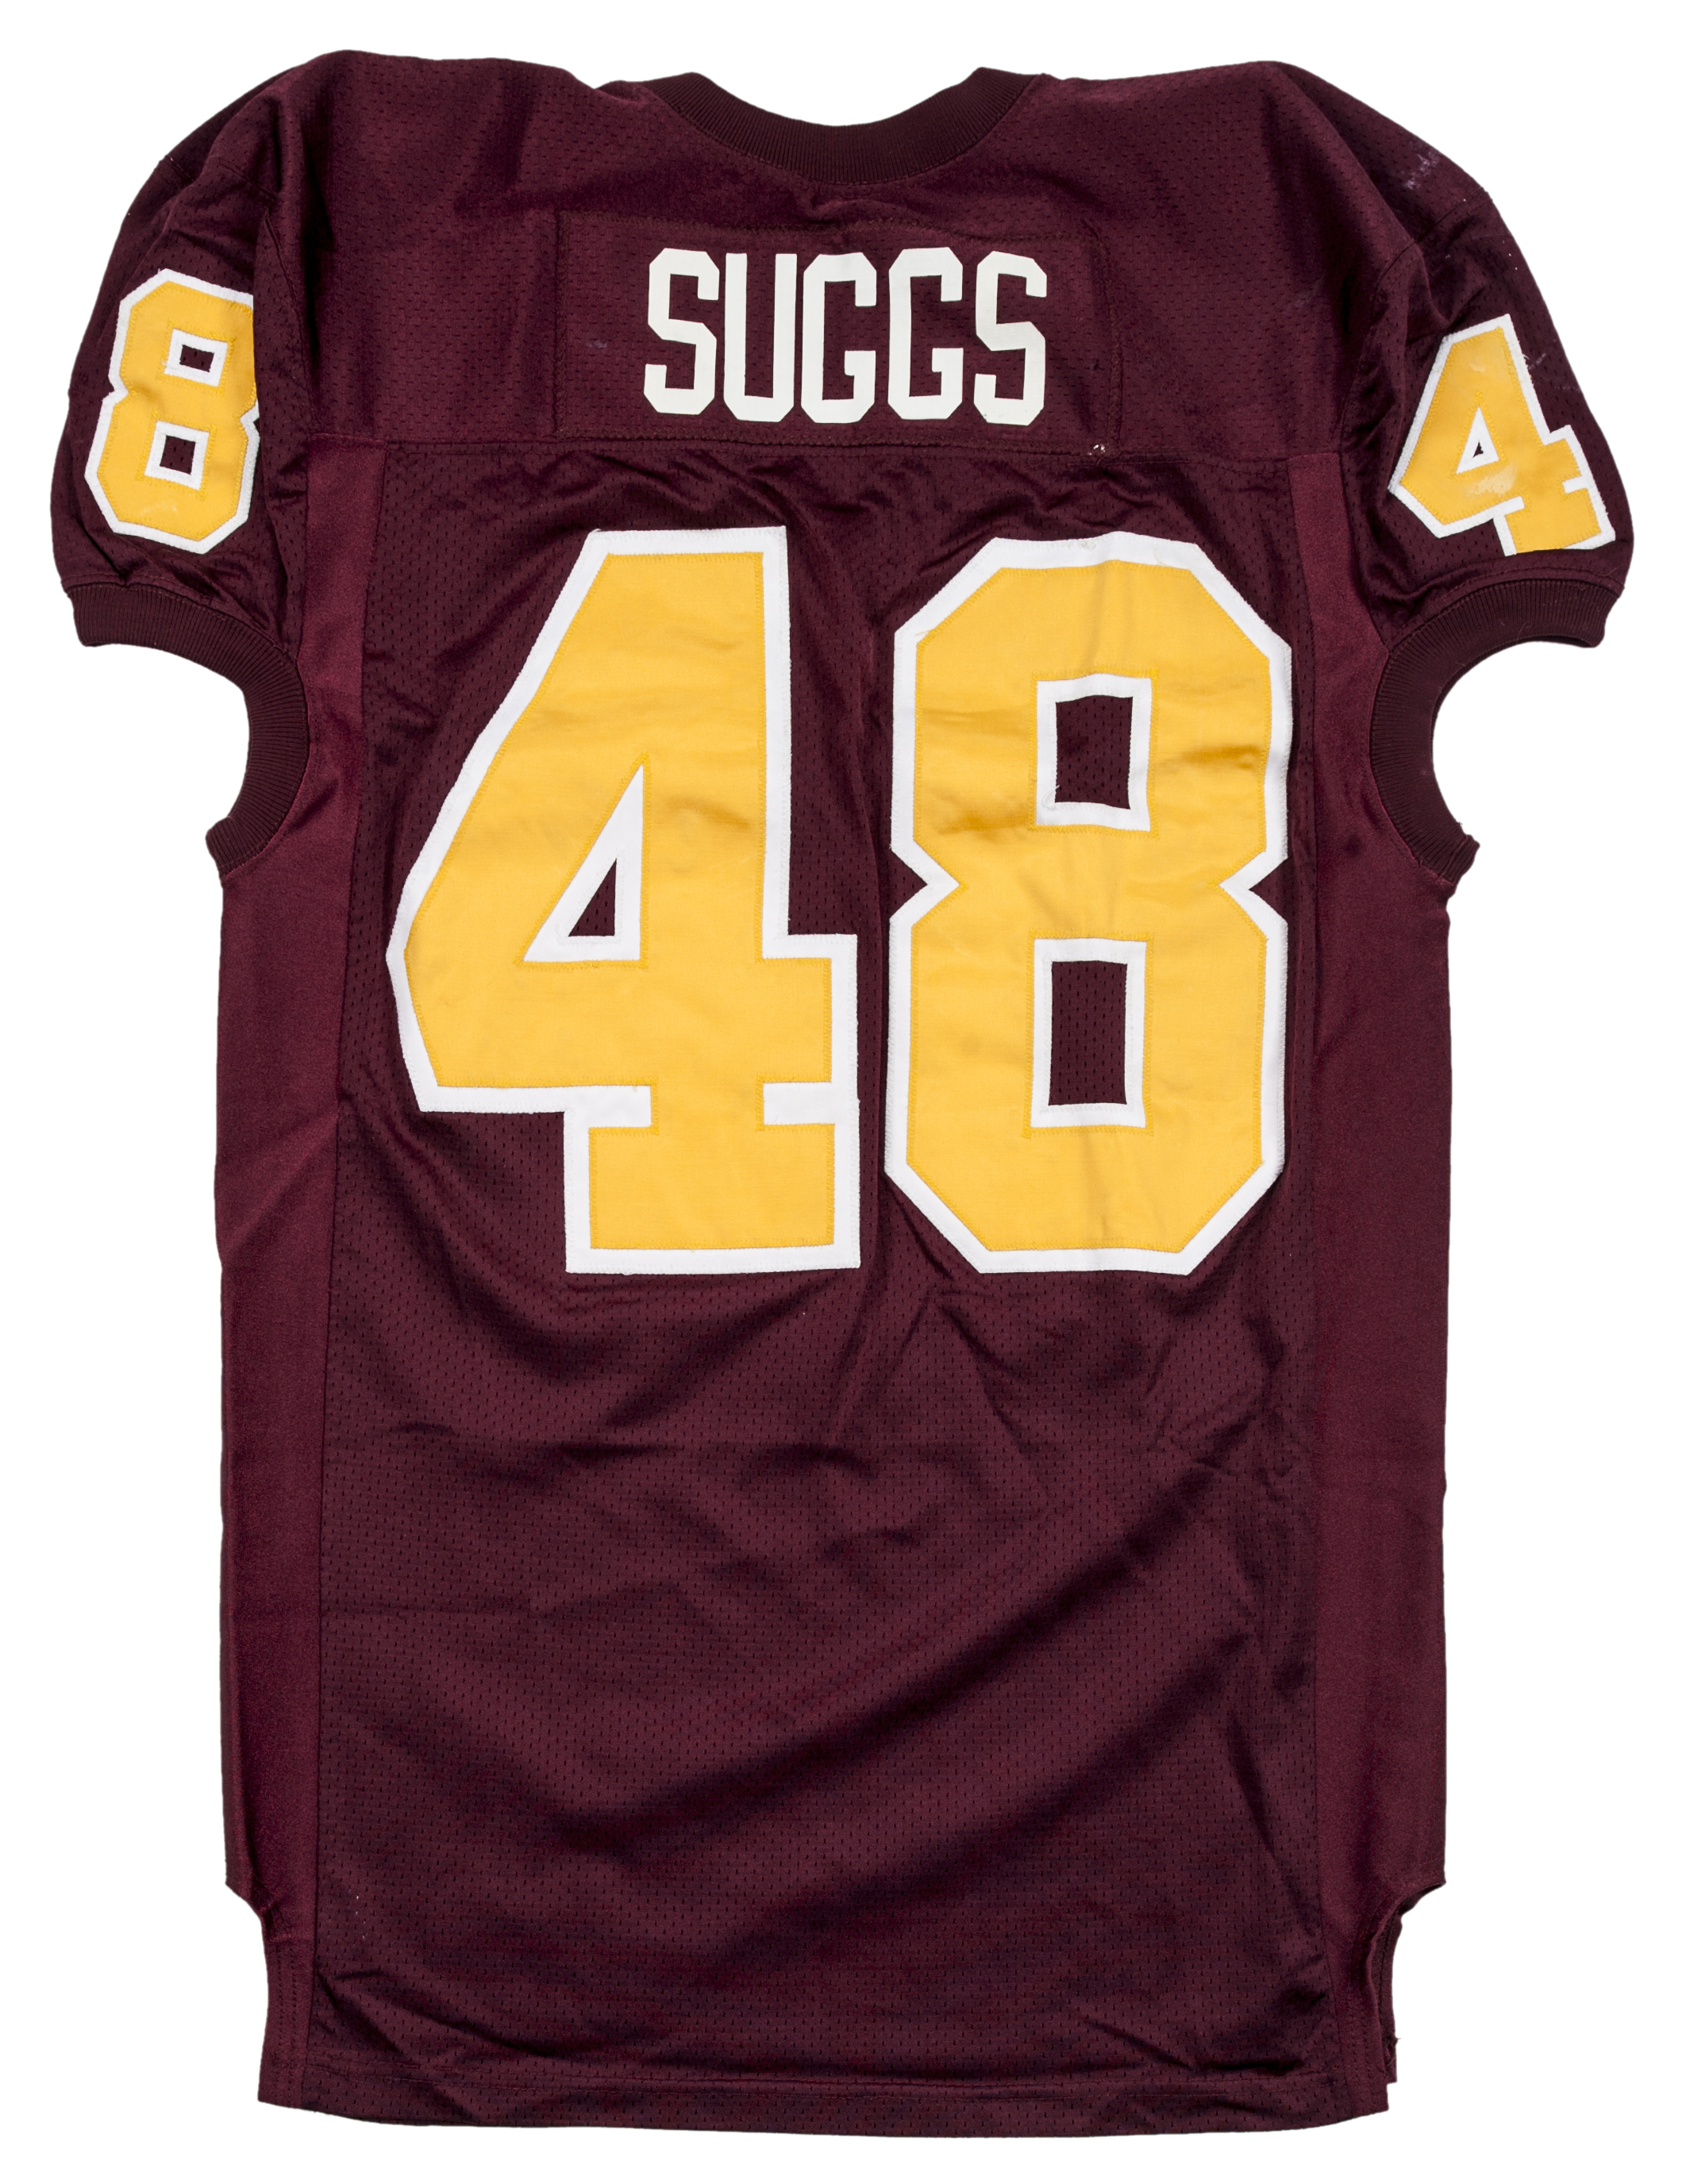 suggs jersey